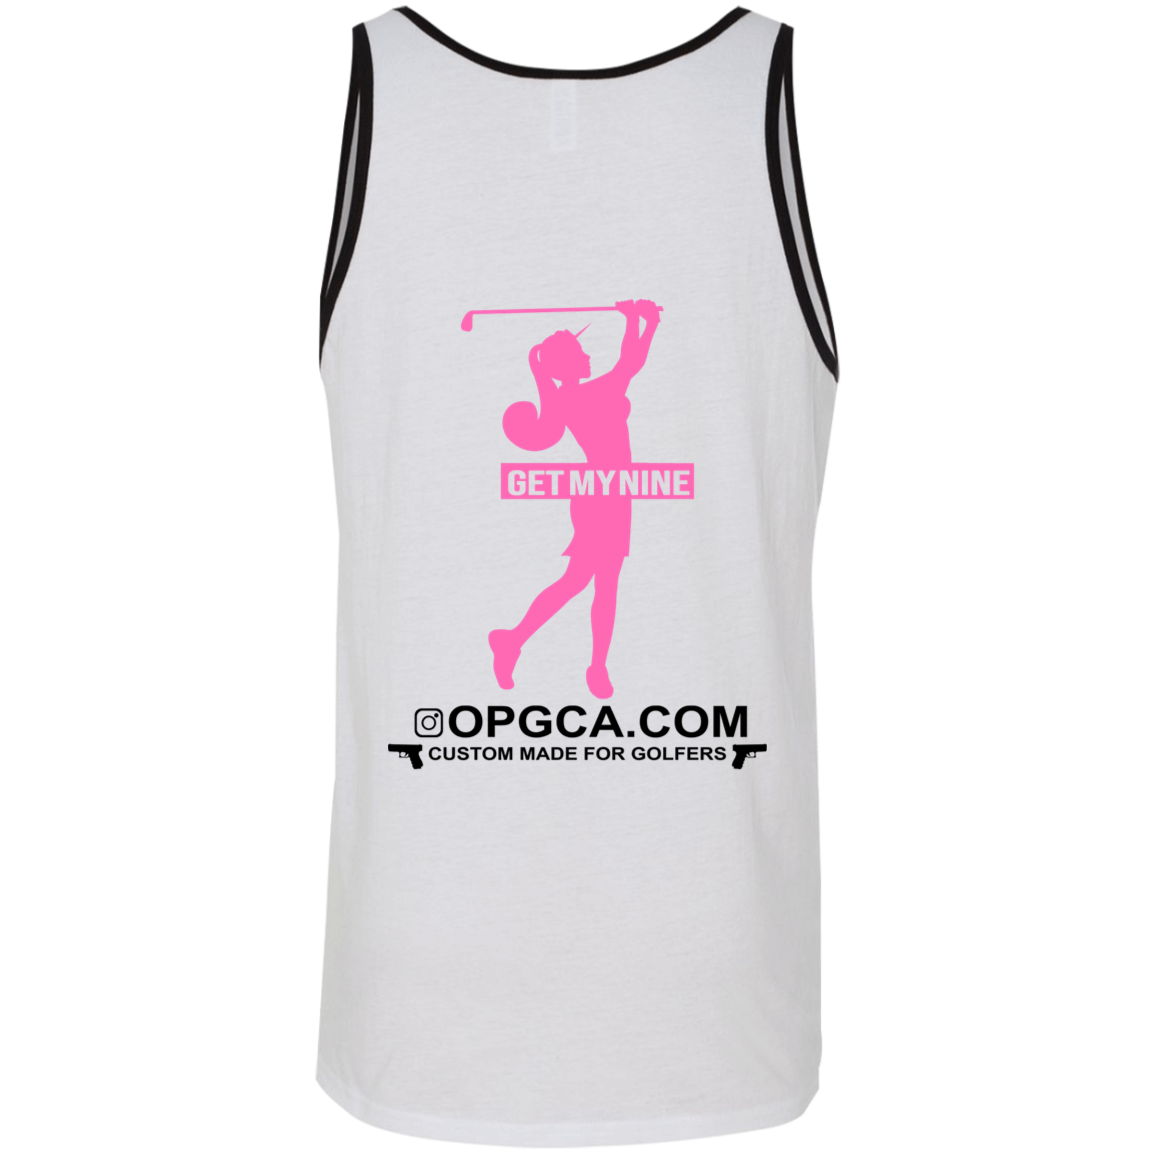 OPG Custom Design #16. Get My Nine. Female Version. 2 Tone Tank 100% Combed and Ringspun Cotton